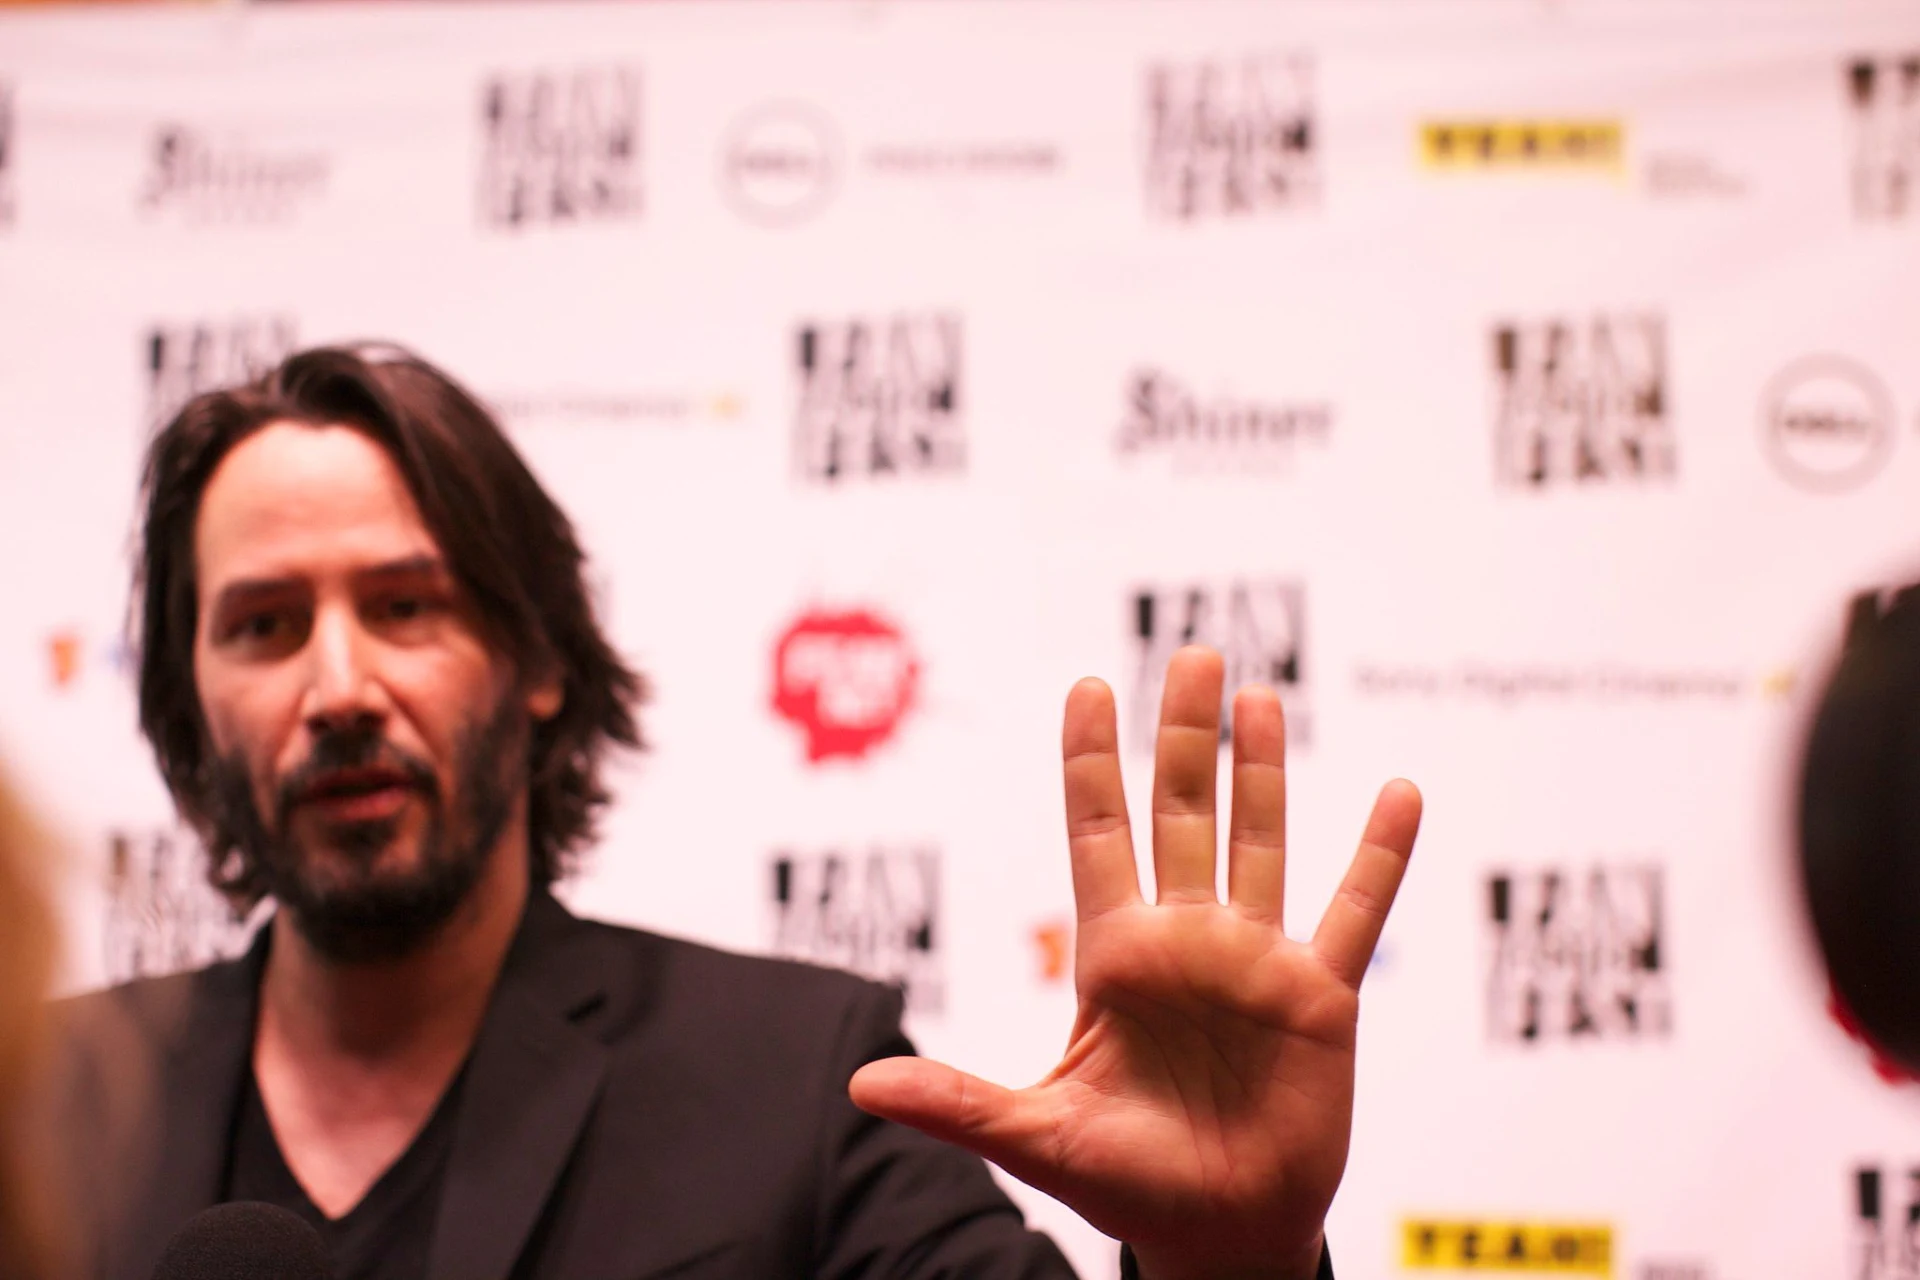 Keanu Reeves extending an open hand in a halting gesture to reporters at an event in 2013.